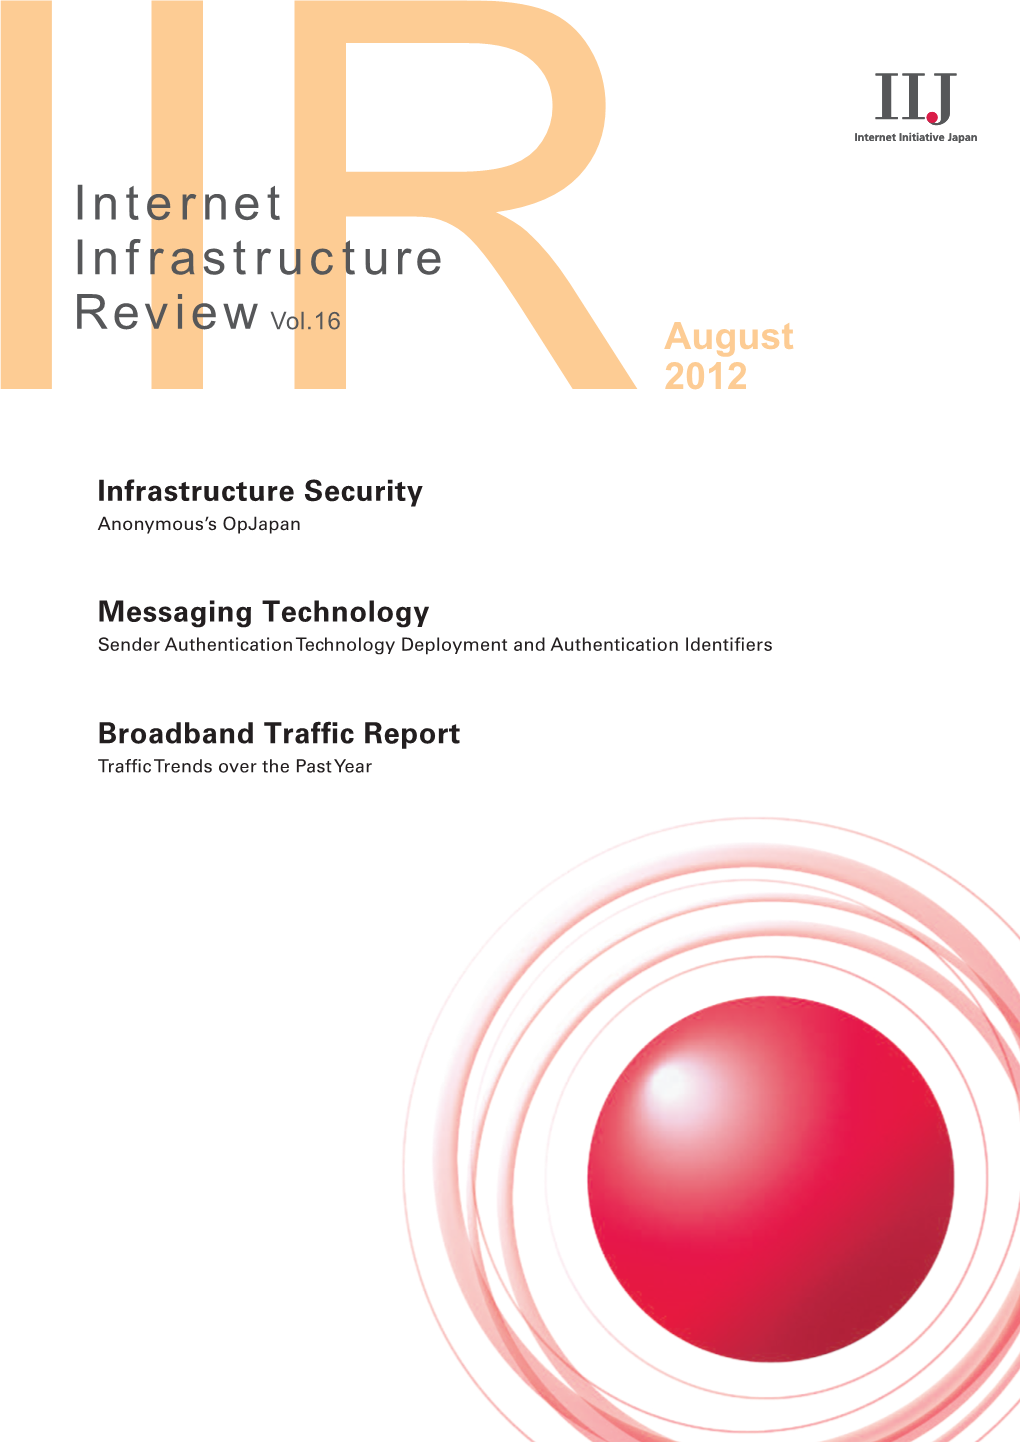 Internet Infrastructure Review Vol.16